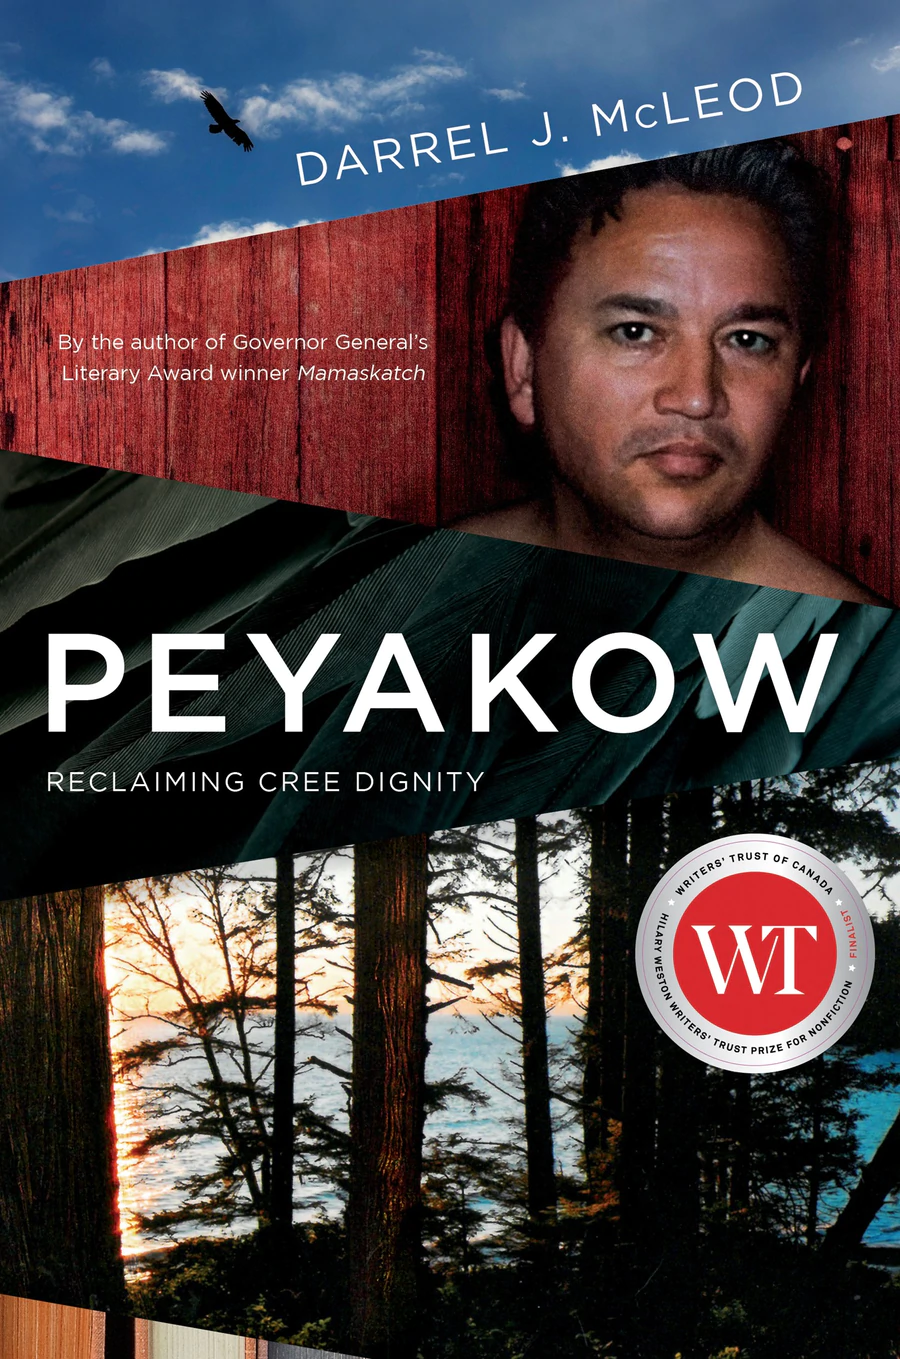 Cover image for PEKAYOW, by Darrel J. Mcleod, showcasing a headshot of an Indigenous man overtop of a landscape photo showing a copse of trees.